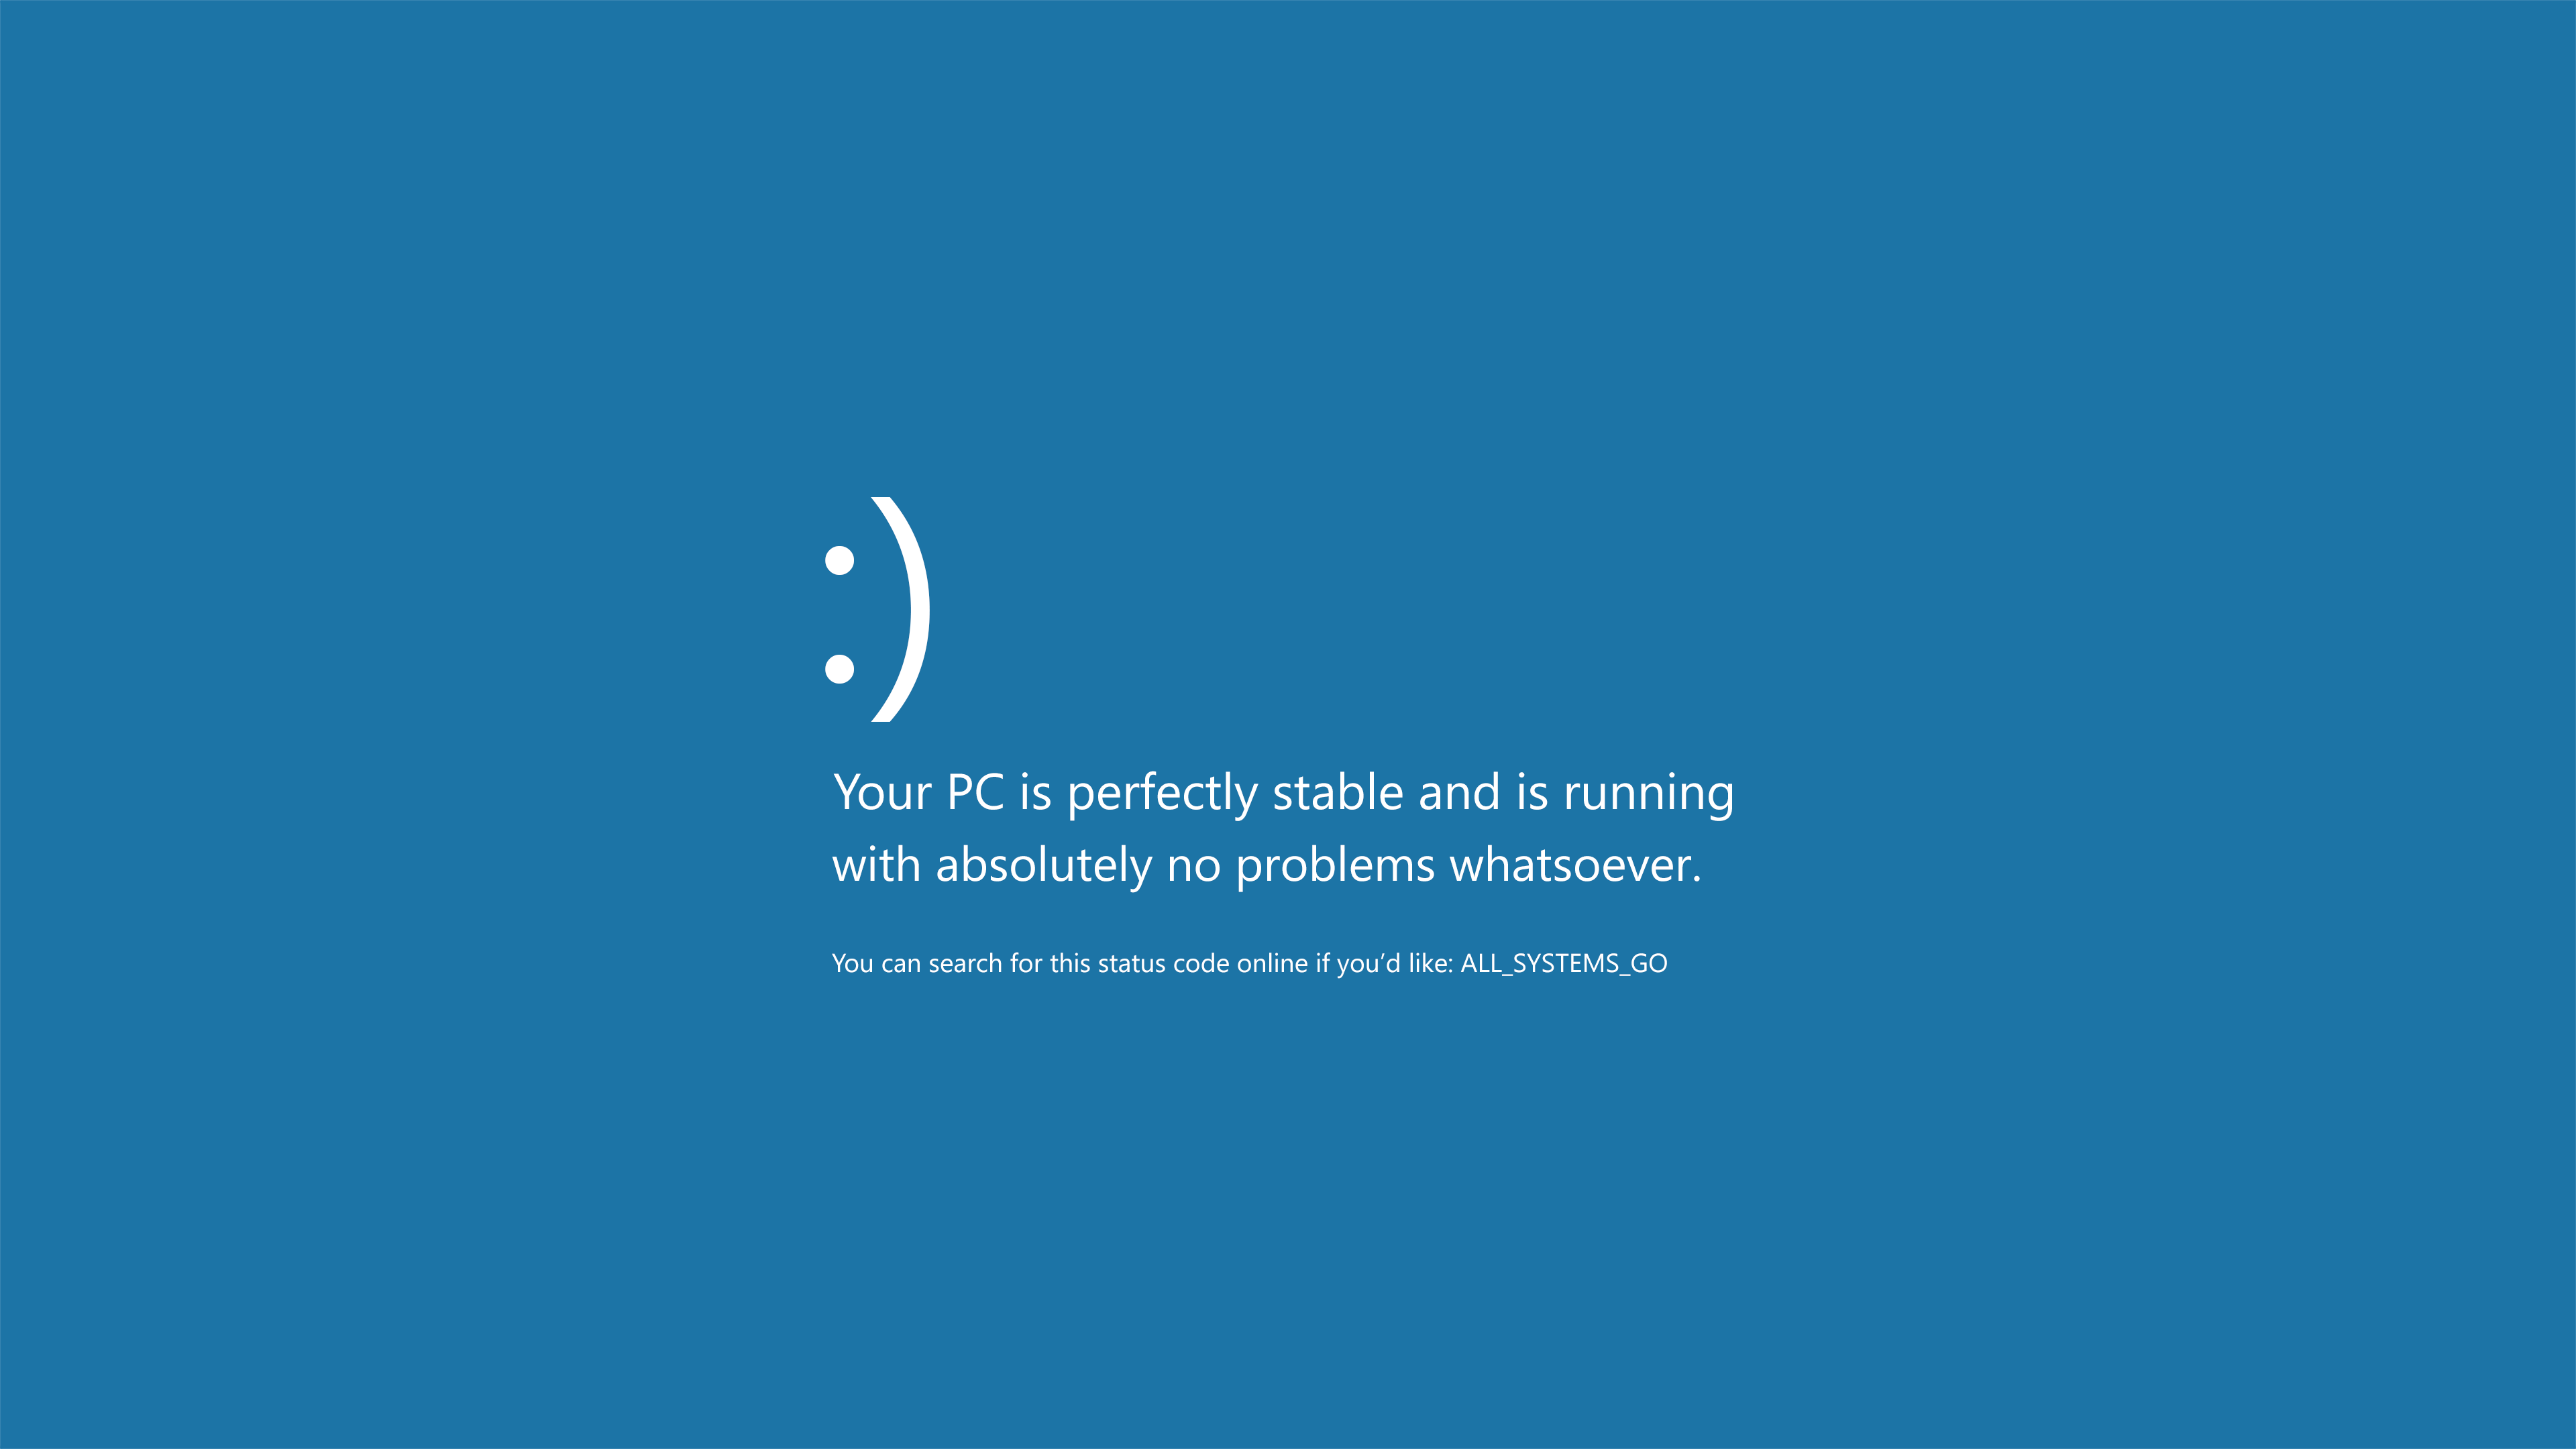 This 4k Bsod Wallpaper Is The Perfect Choice For Windows 10 Fanboys